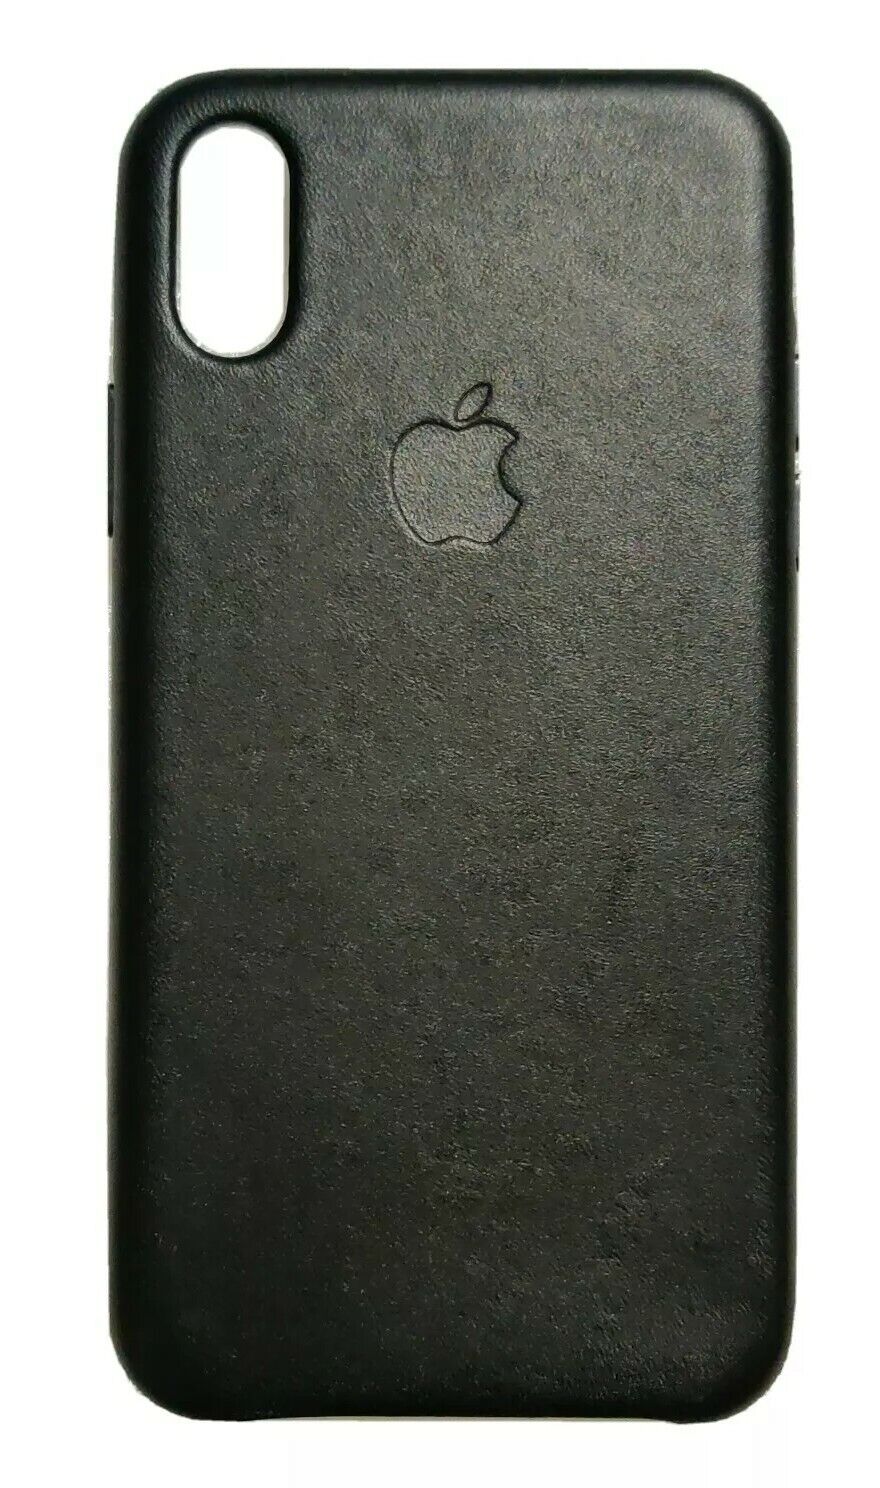 Apple Leather Case for iPhone XS Black MRWM2ZM/A